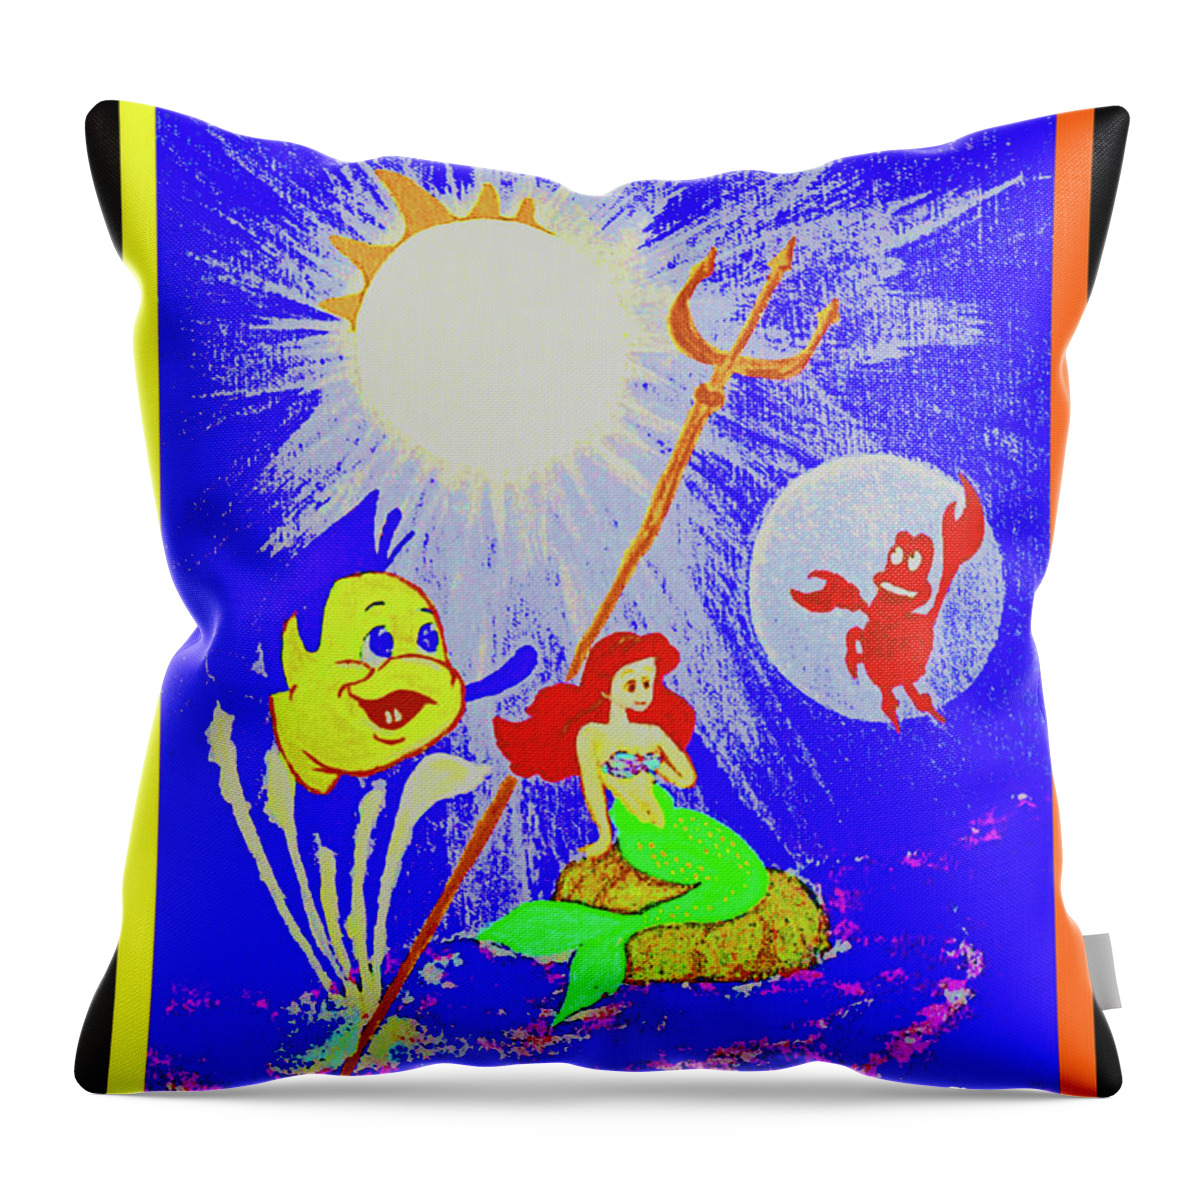 Little Mermaids Throw Pillow featuring the digital art Friends Below The Sea by Joseph Coulombe